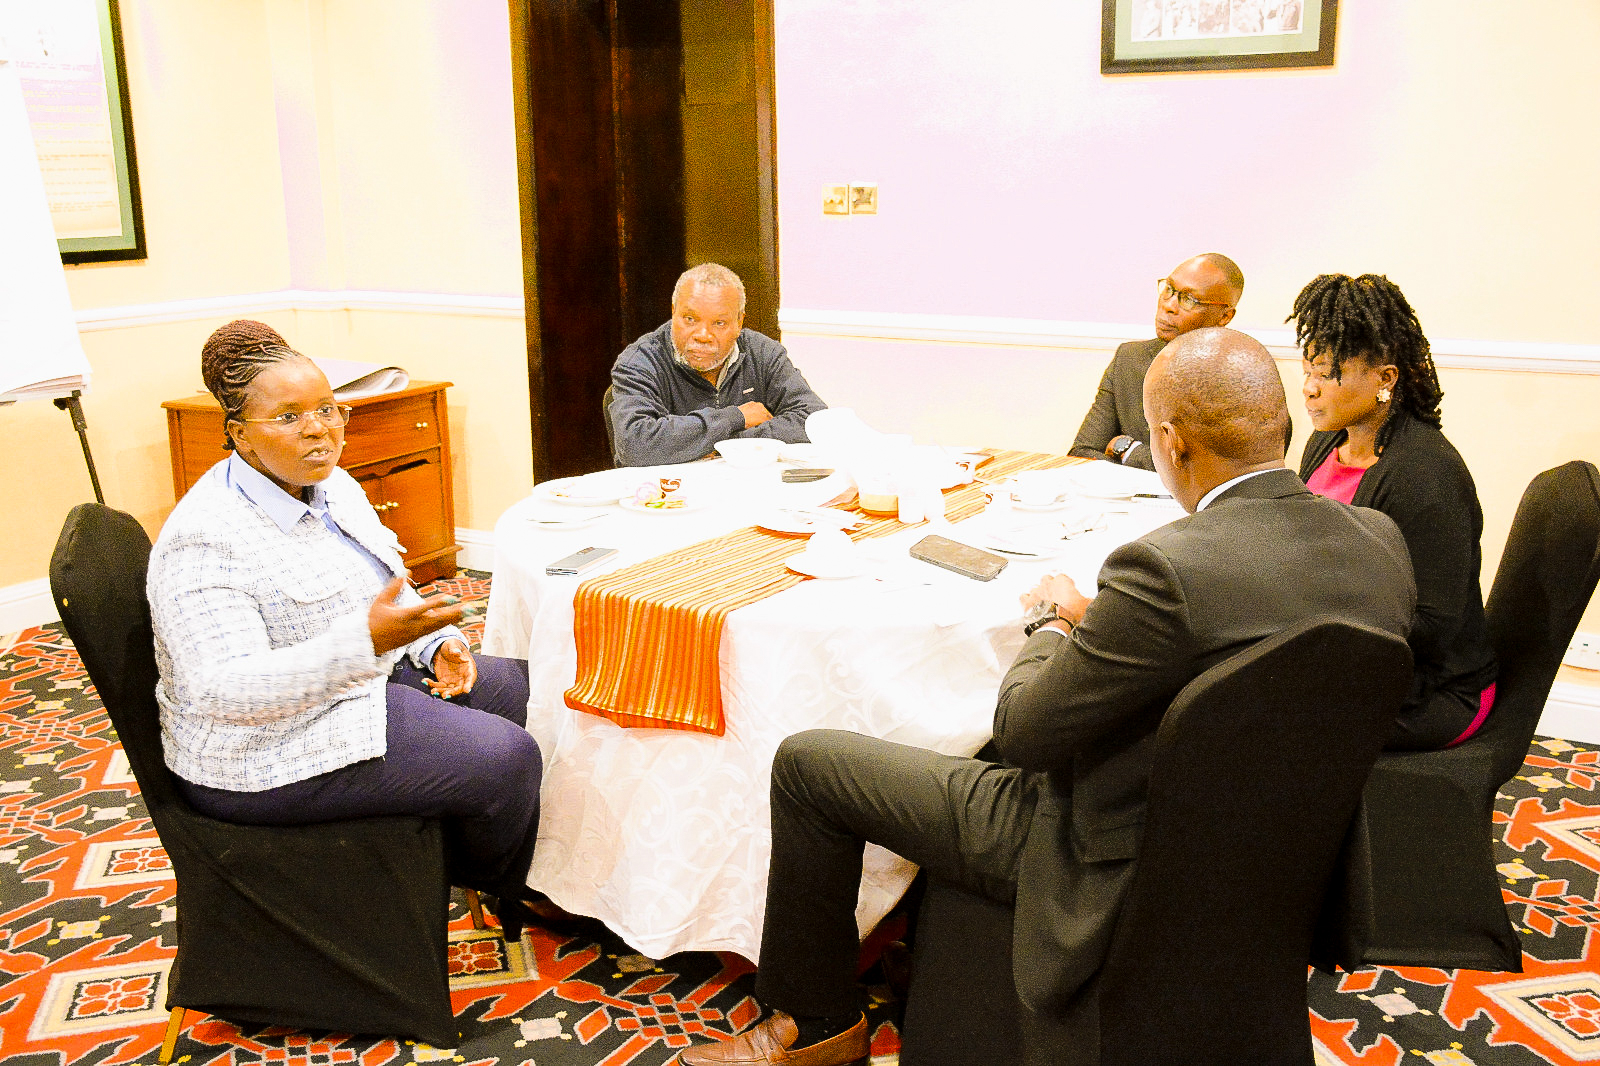 The Cabinet Secretary, Hon. Peninah Malonza, with some of the editors of the leading media houses in Kenya, during the media consultative roundtable.